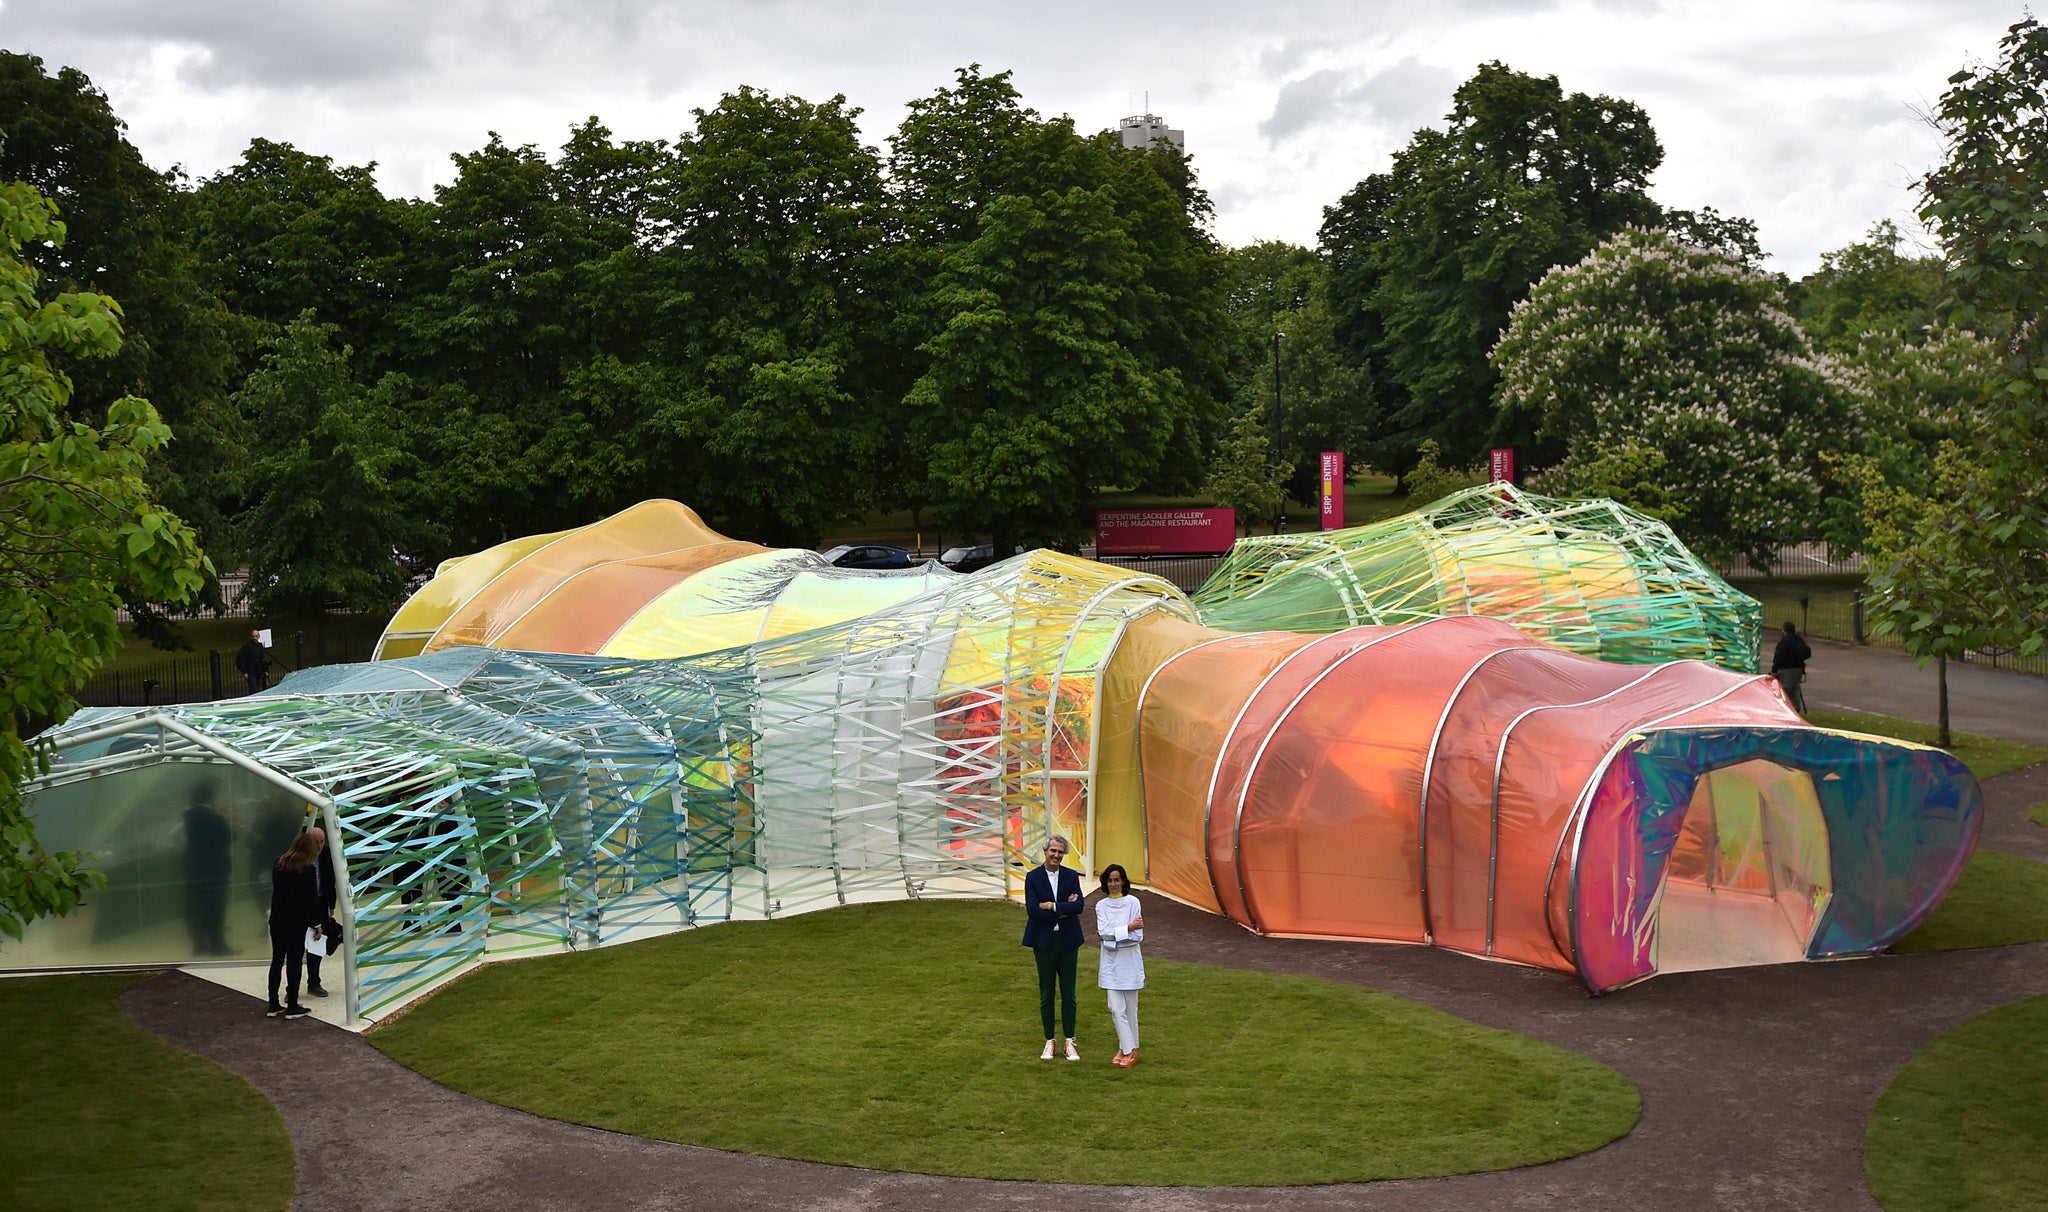 Spanish architects Lucia Cano (R) and Jose Selgas pose by their Serpentine pavilion structure